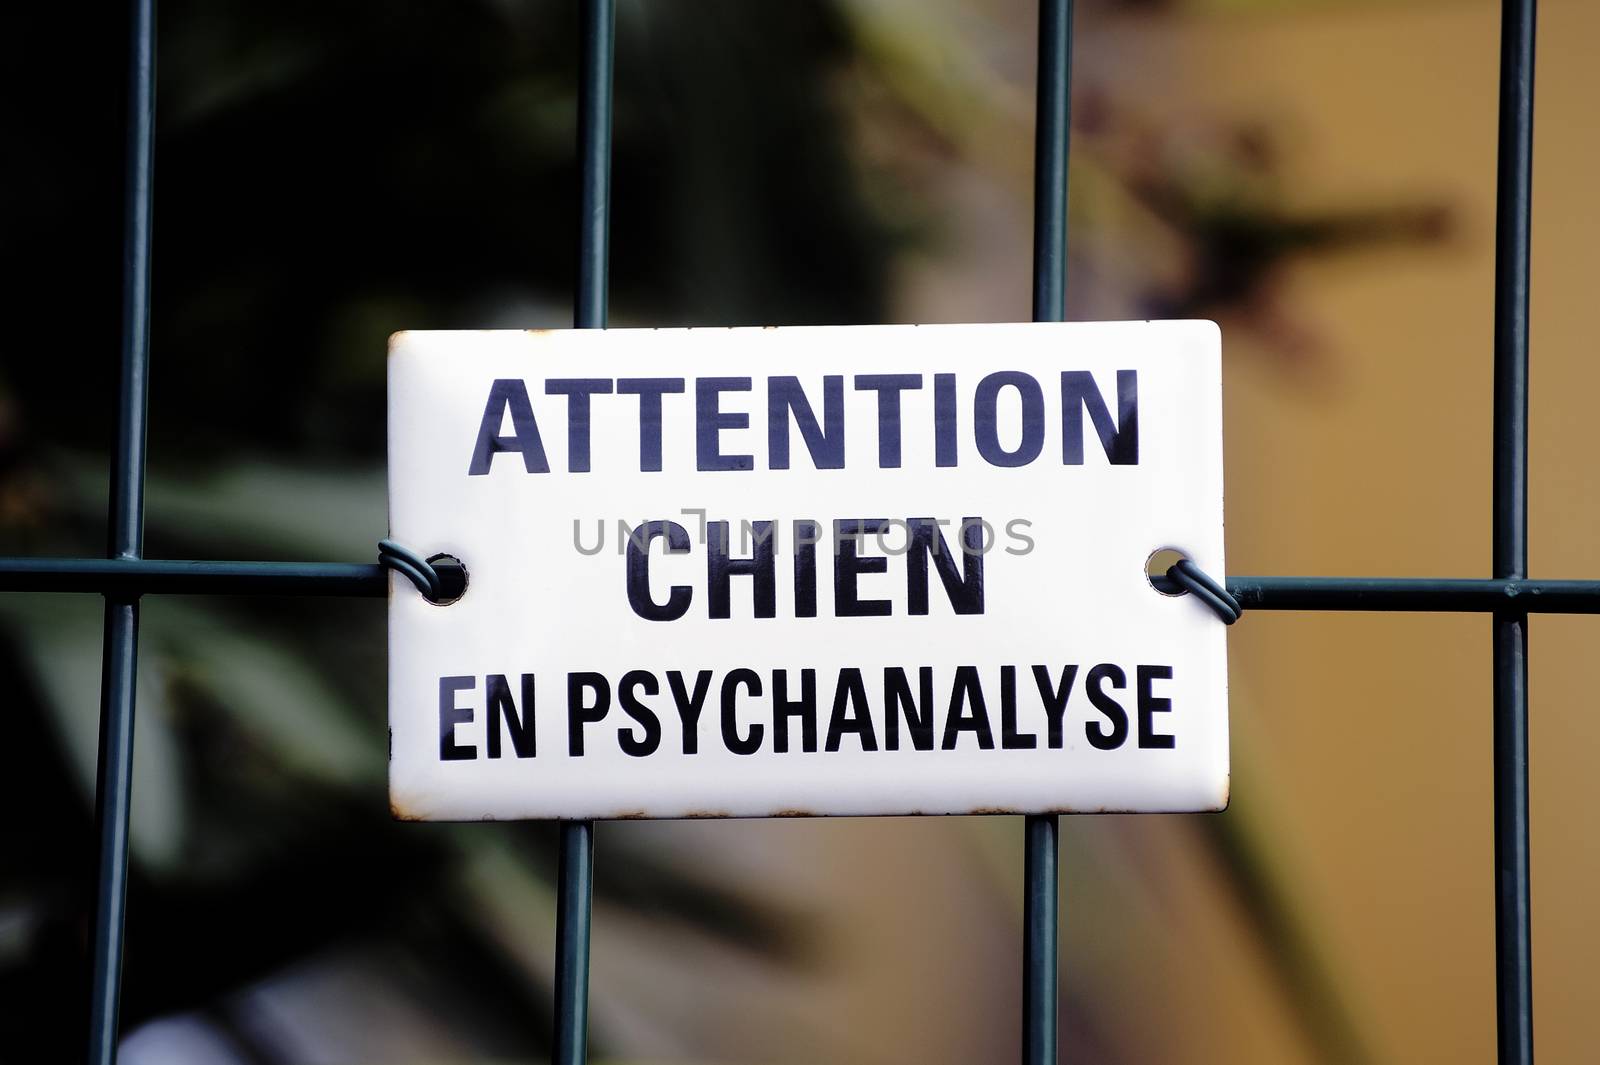 Warning! dog in psychoanalysis by gillespaire